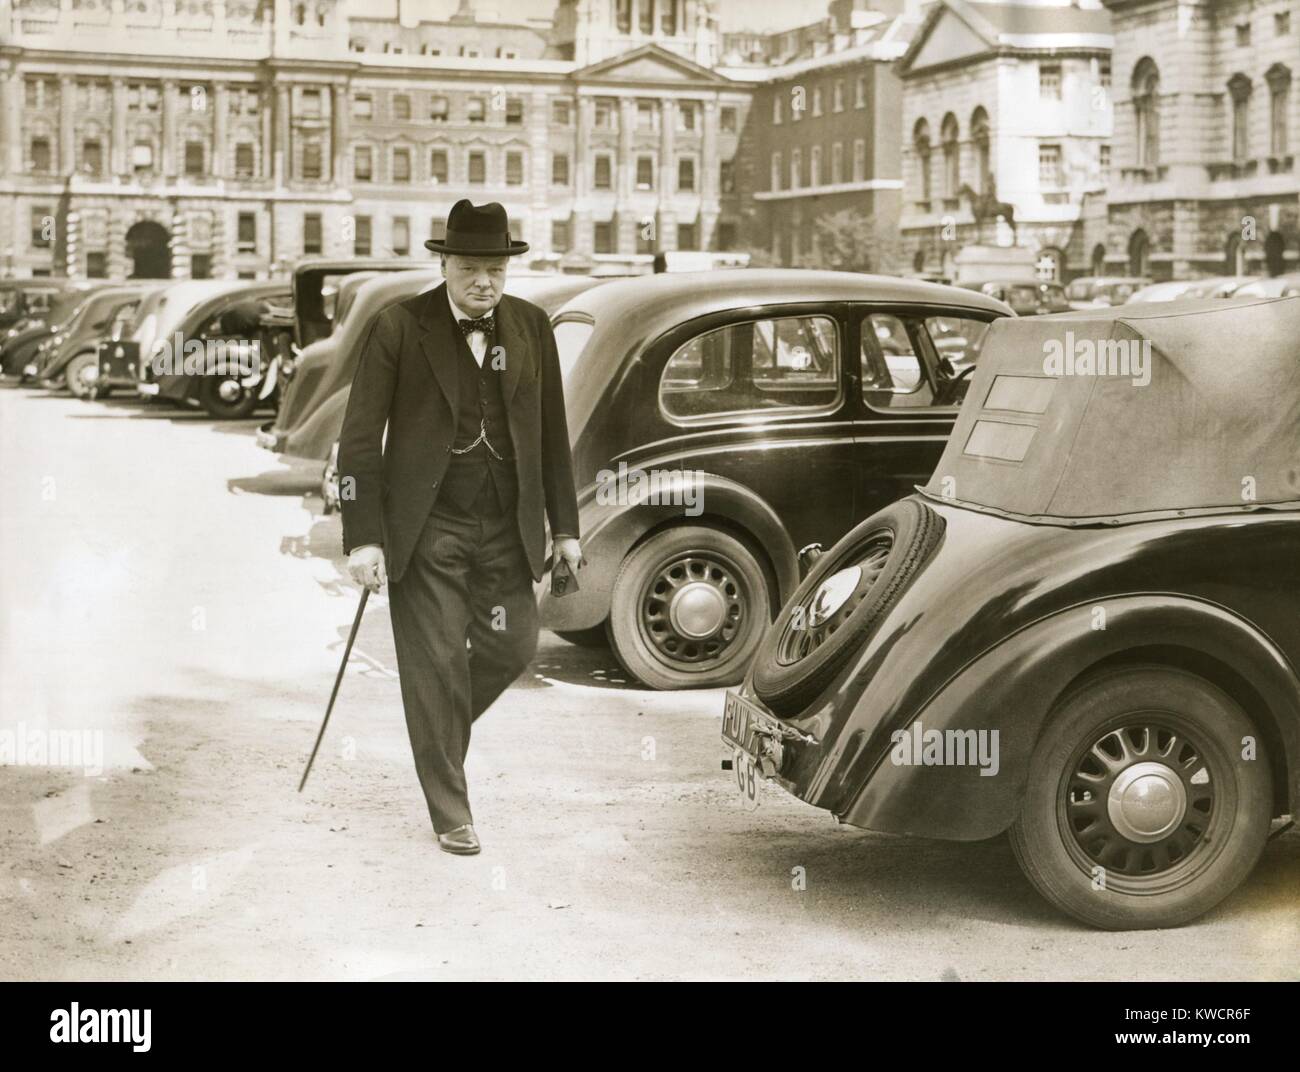 Mr. Winston Churchill, First Lord of the Admiralty, walking to 10 Downing Street, Sept. 7, 1939. He was in Prime Minister Neville Chamberlain's War Cabinet, formed after the German invasion of Poland on Sept. 1 , 1939. - (BSLOC_2014_17_32) Stock Photo